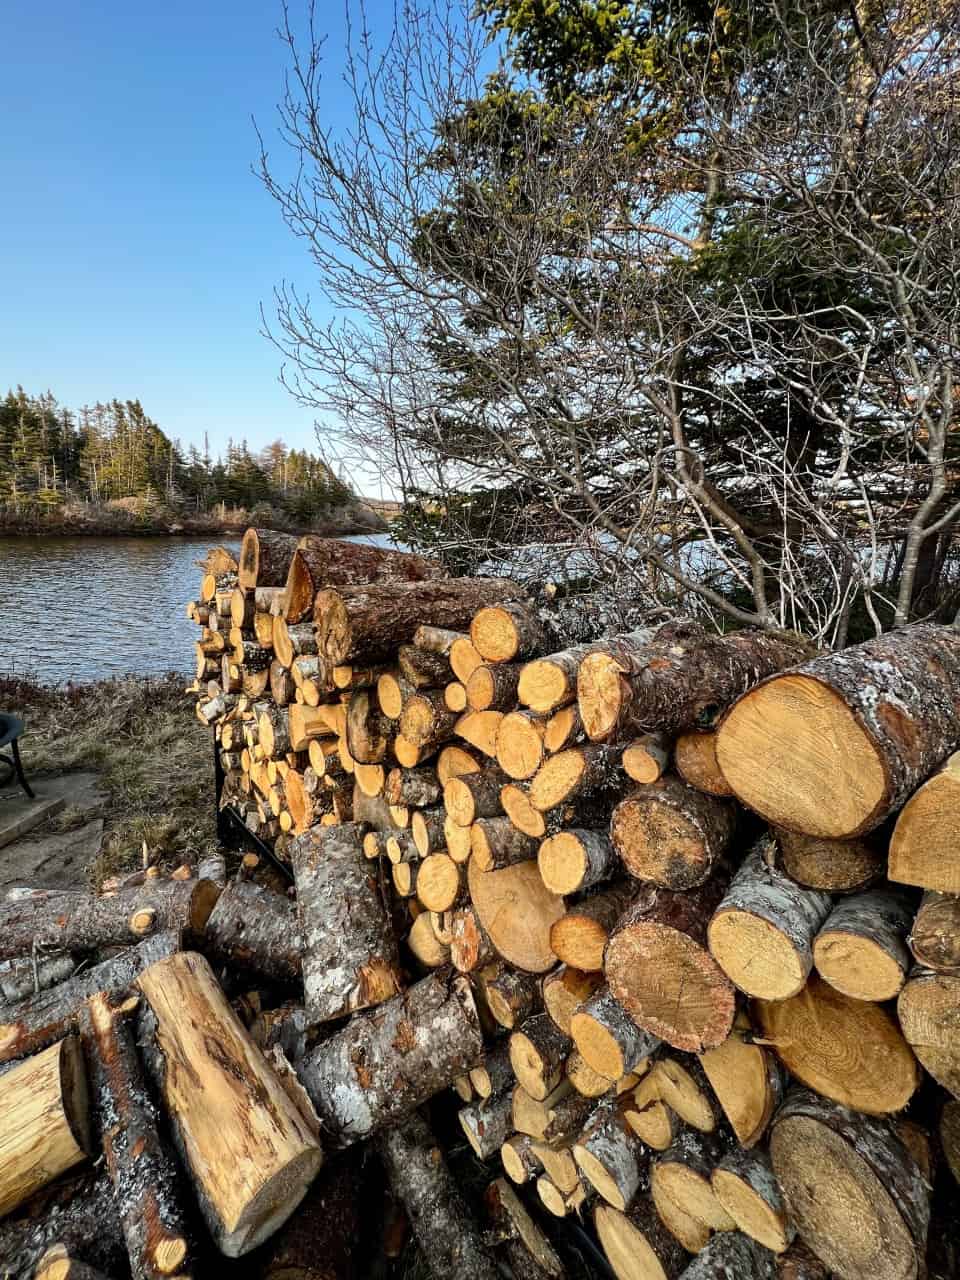 Wood pile by the Pond at the Cottage Fire Pit in Newfoundland Canada - Relaxing at the outdoor fire pit was my favourite place to be at The Murphy Cottage in Newfoundland Canada. There was plenty of fire wood available and I loved watching both sunrise and sunset over the lake. 